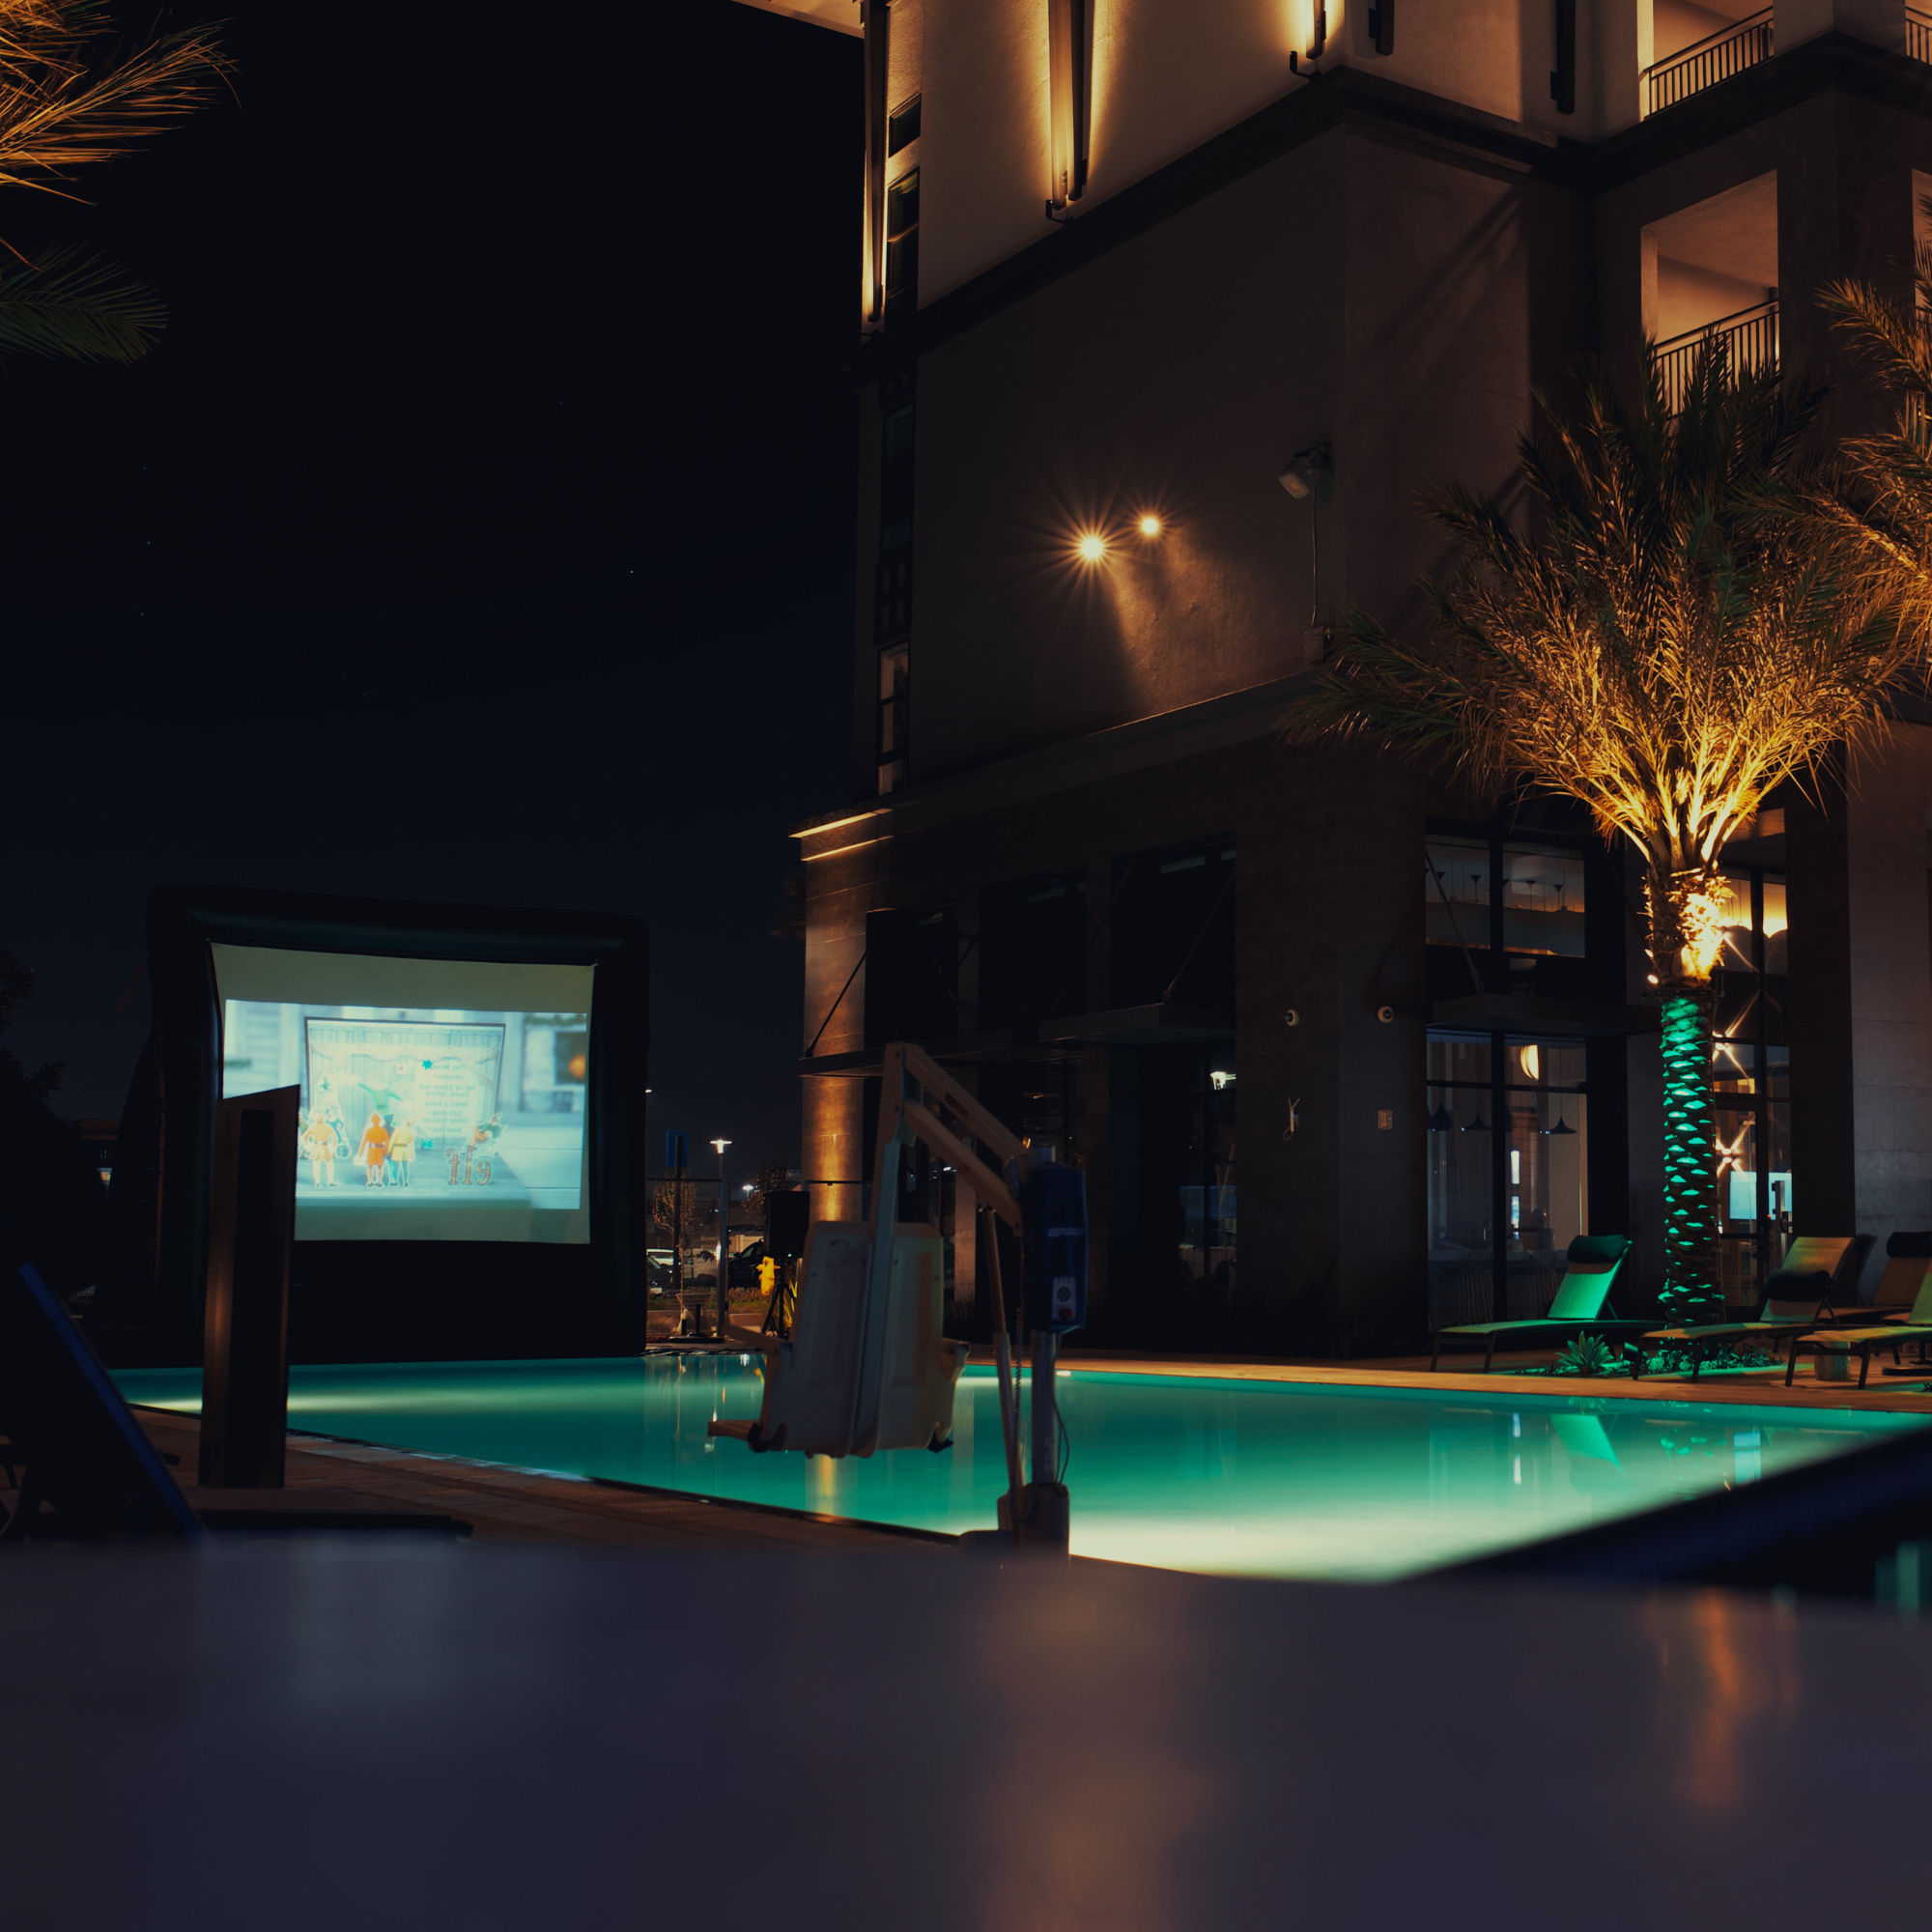 Apartment movie party by the pool